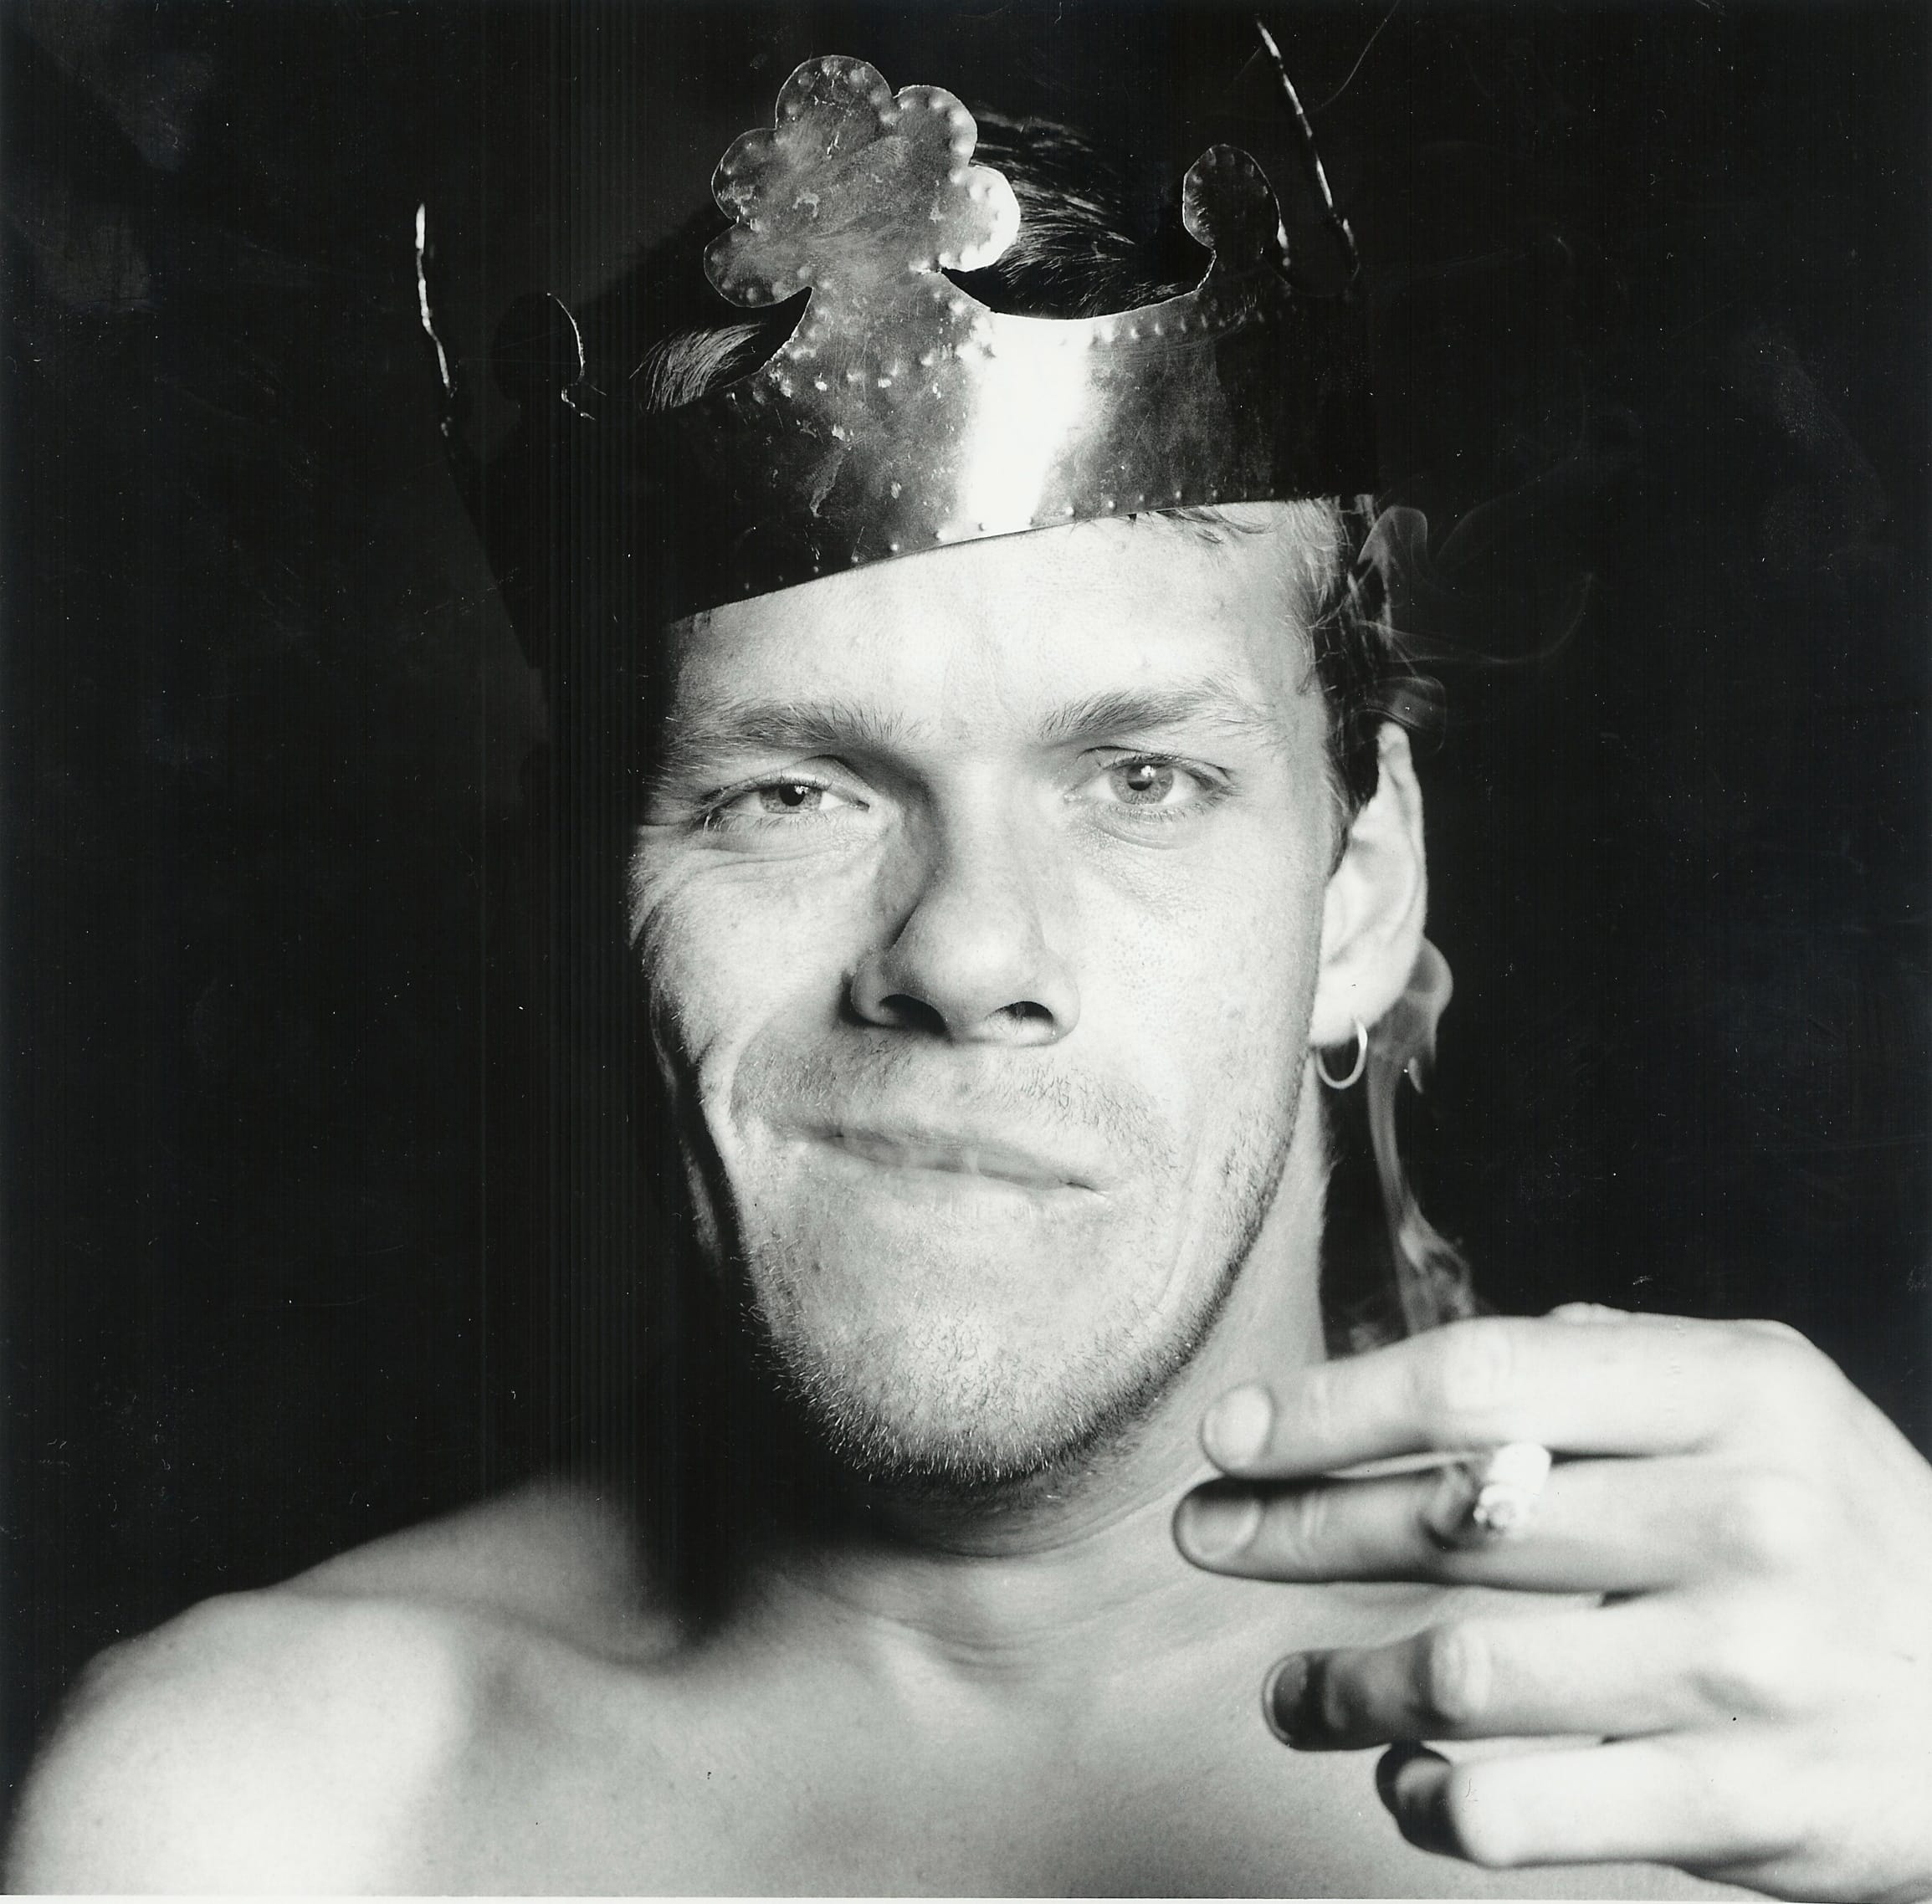 A man faces the camera with a smug expression on his face, he is smoking a lit cigarette and has a crown on his head.